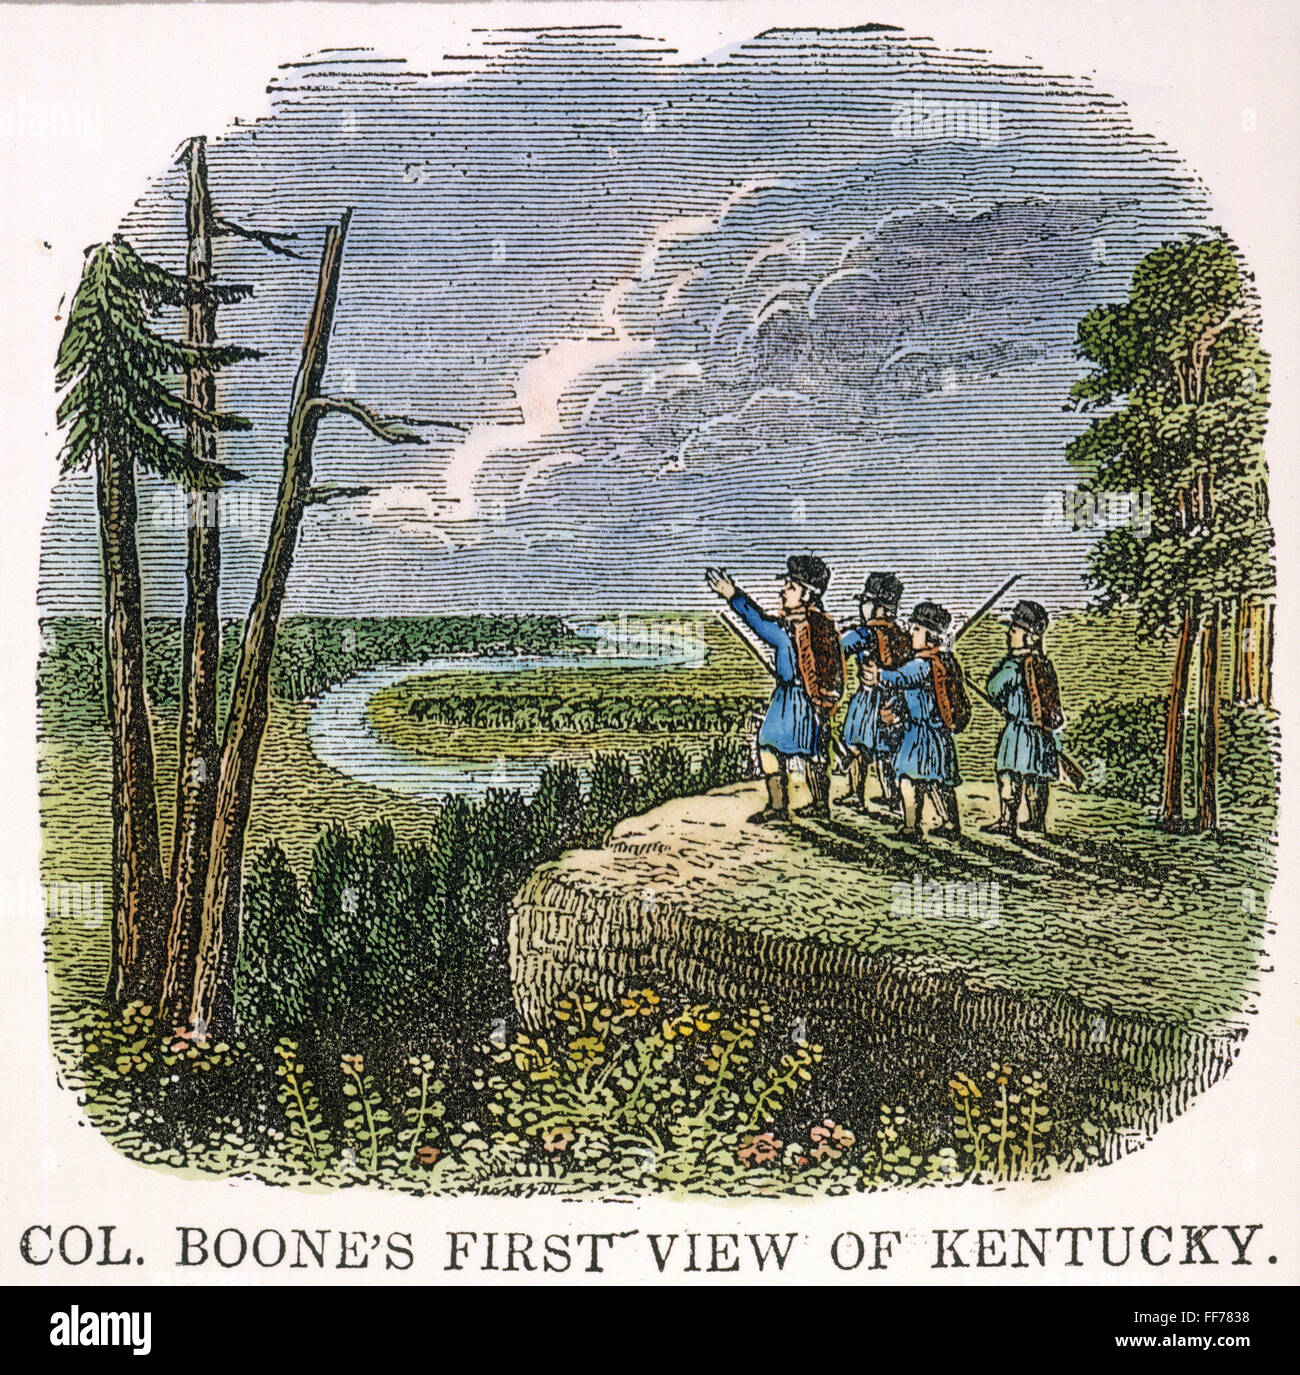 DANIEL BOONE (1734-1820). /nAmerican frontiersman. Boone's first view of Kentucky in 1769. Wood engraving, American, c1850. Stock Photo